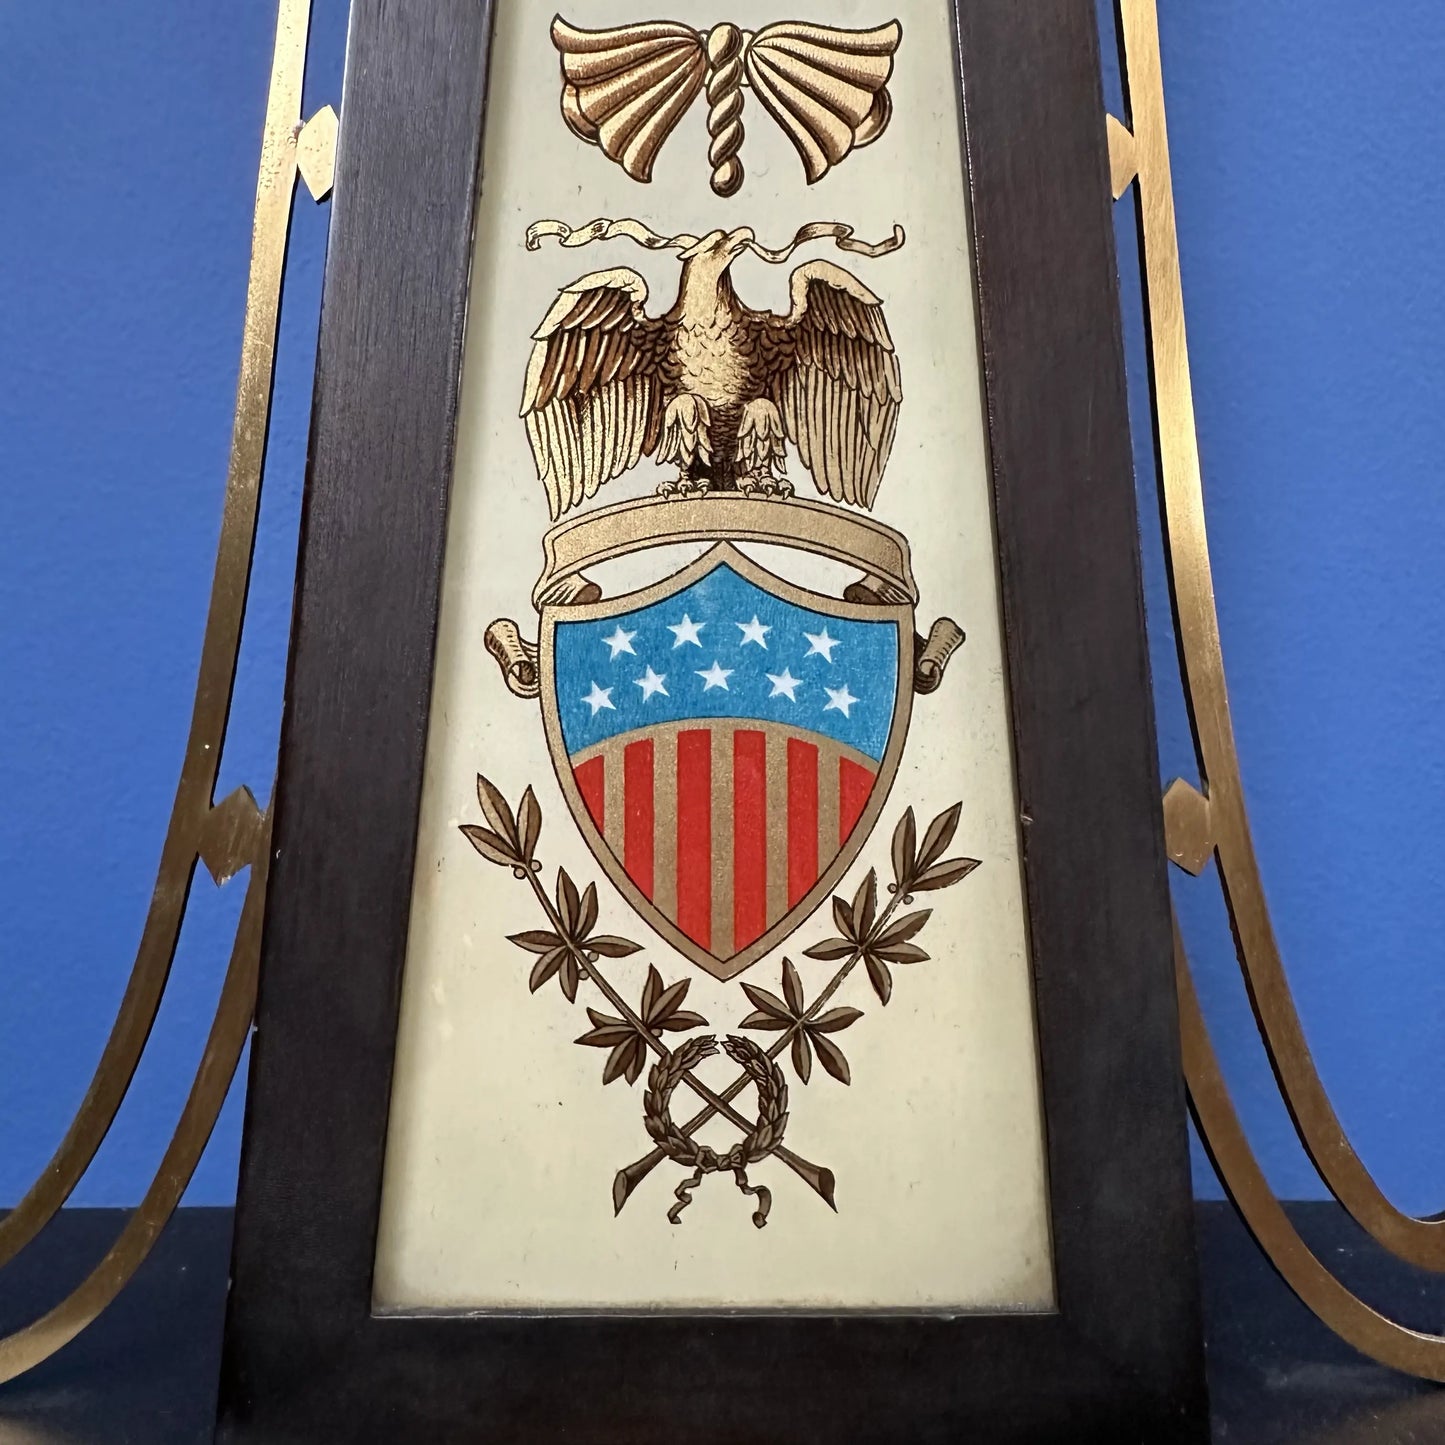 Seth Thomas "Banjo Clock" with a depiction of a naval engagement